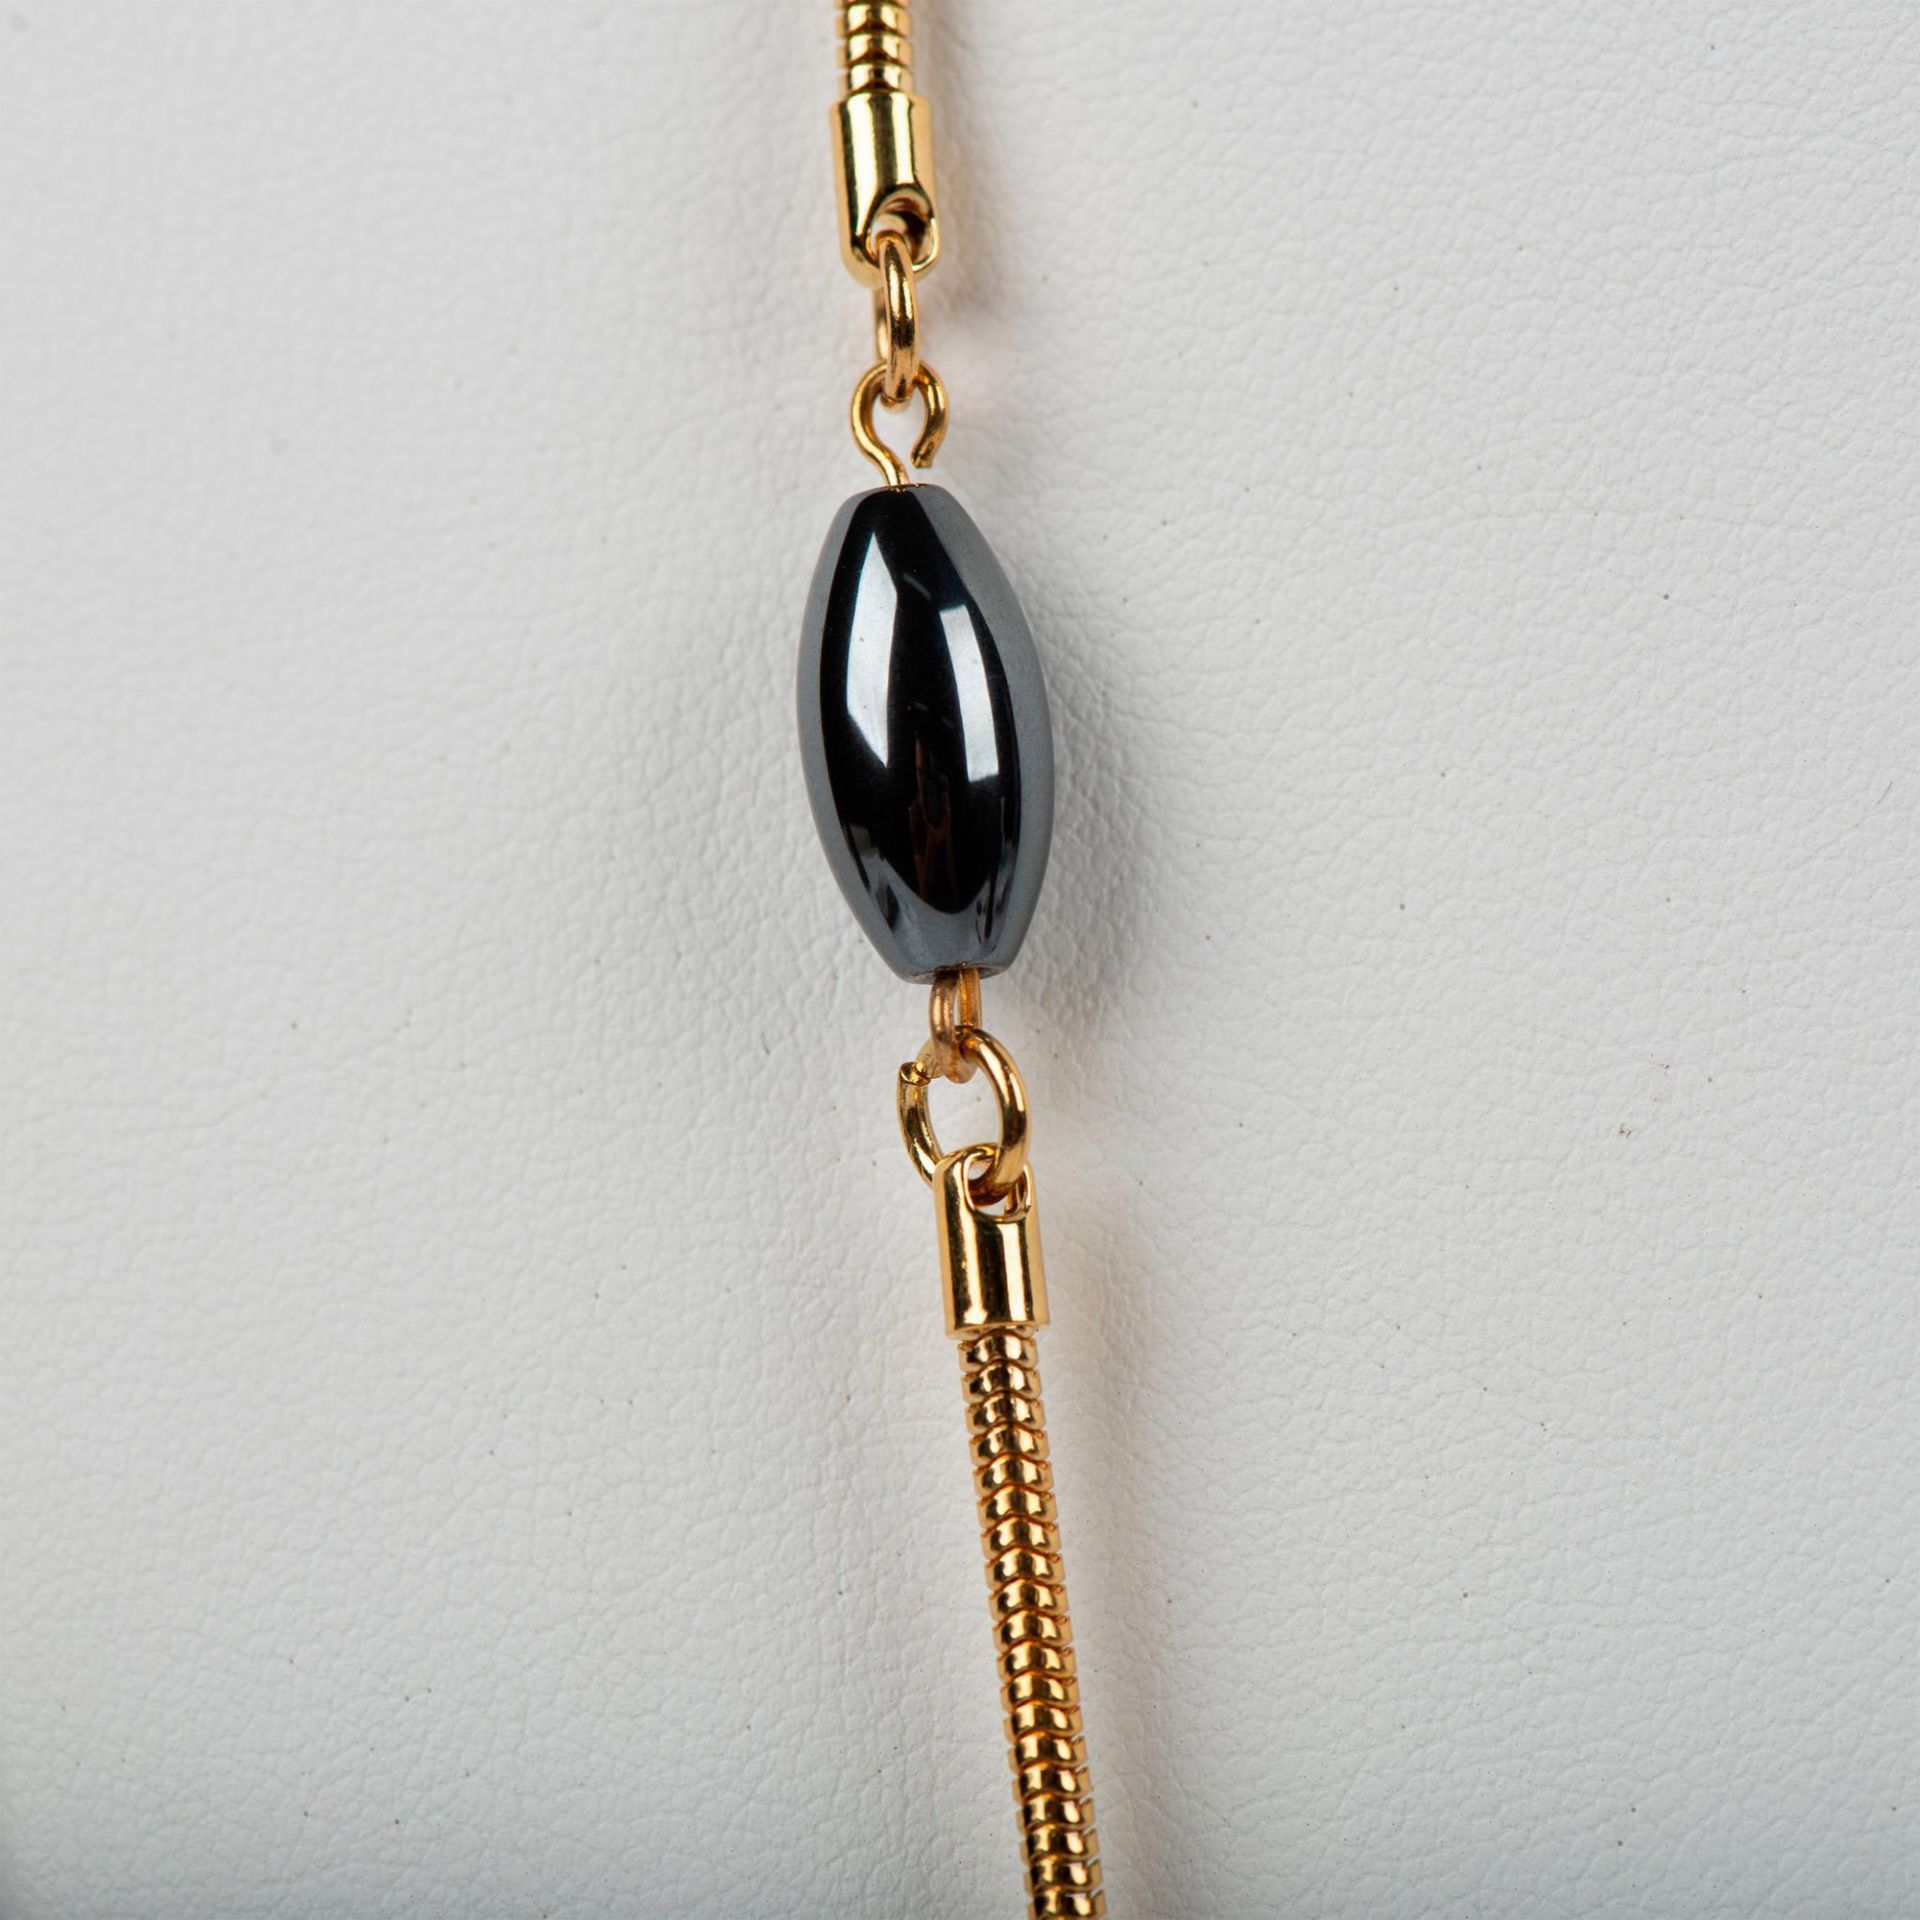 Monet Gold & Hematite Long Necklace and Clip-On Earrings - Image 3 of 5